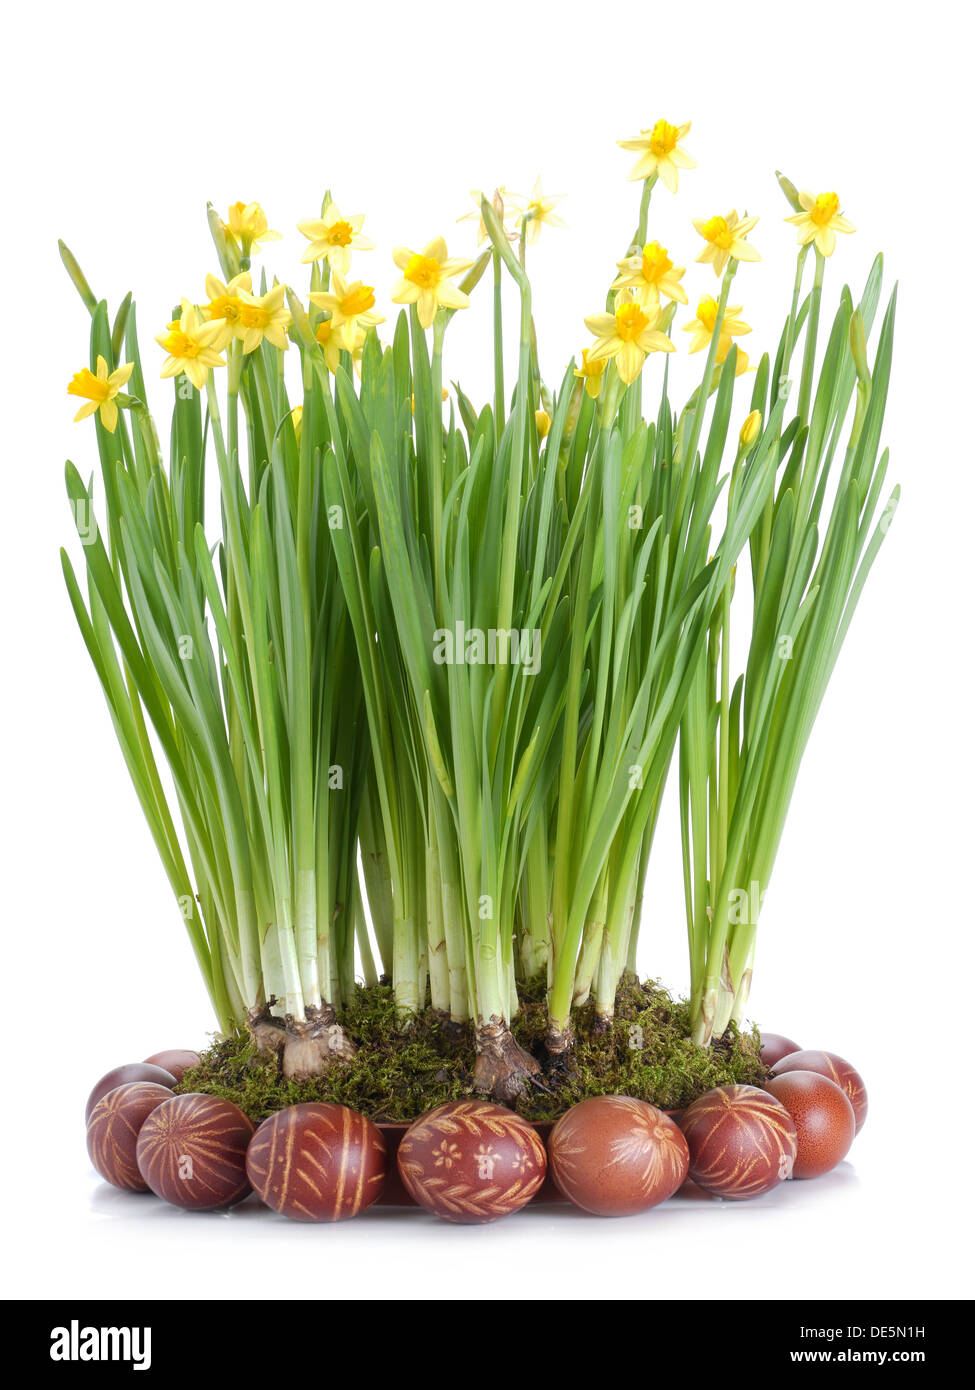 Easter eggs and bunch of fresh garden daffodils over white background Stock Photo